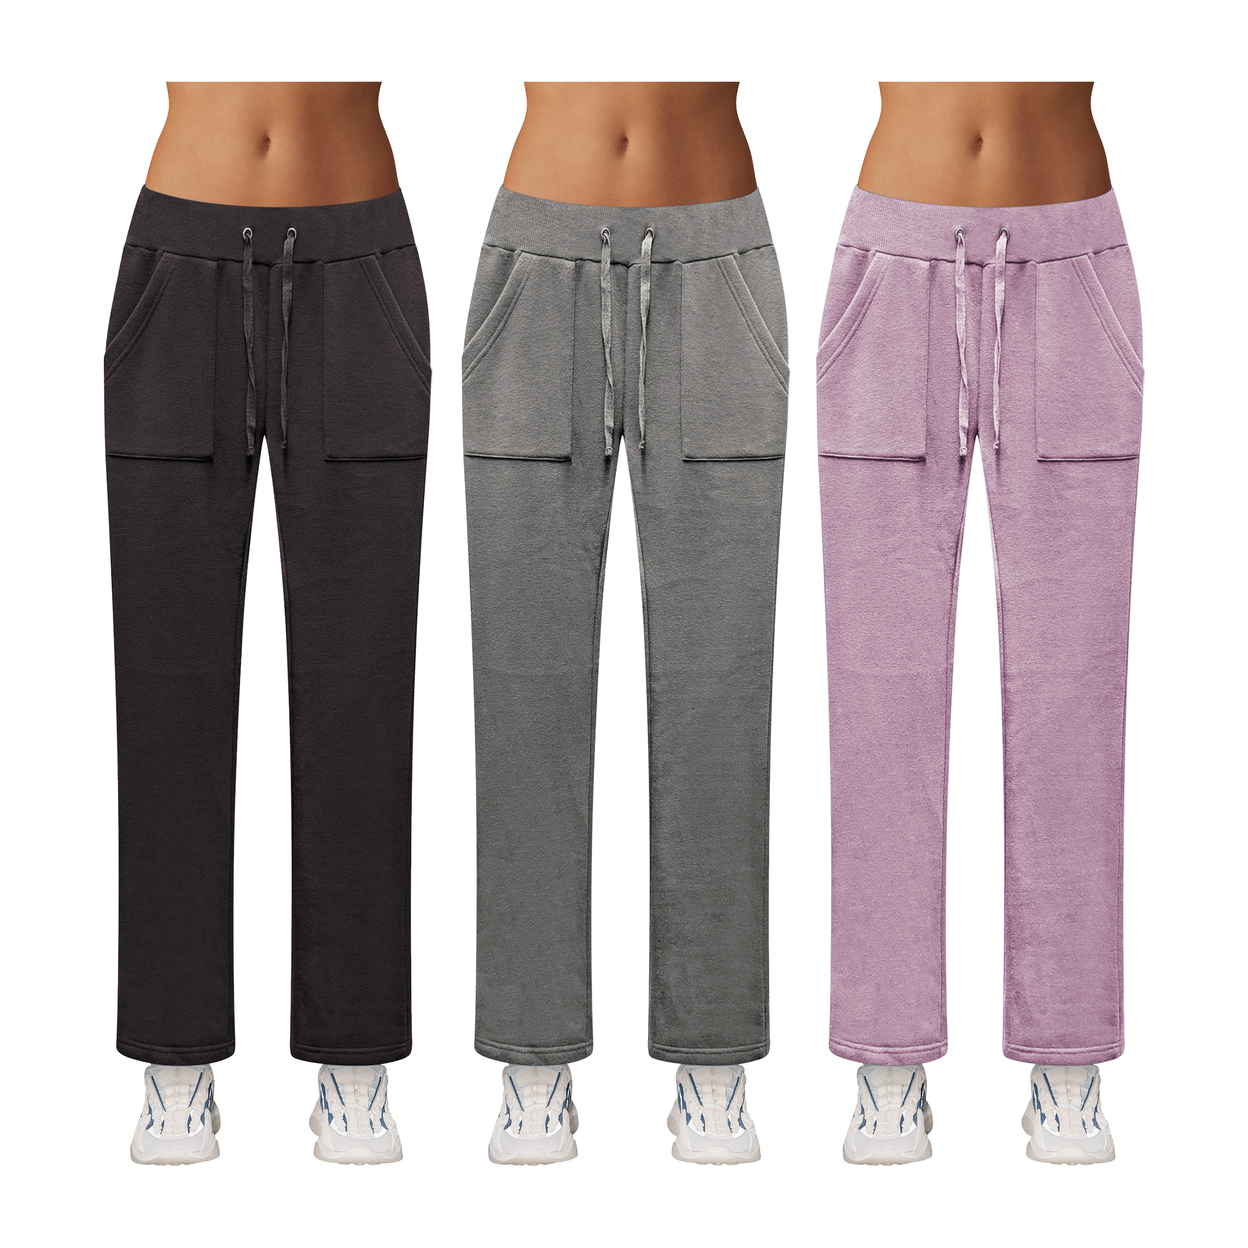 Multi-Pack: Women's Ultra-Soft Cozy Fleece Lined Elastic Waistband Terry Knit Pants - 3-pack, Large